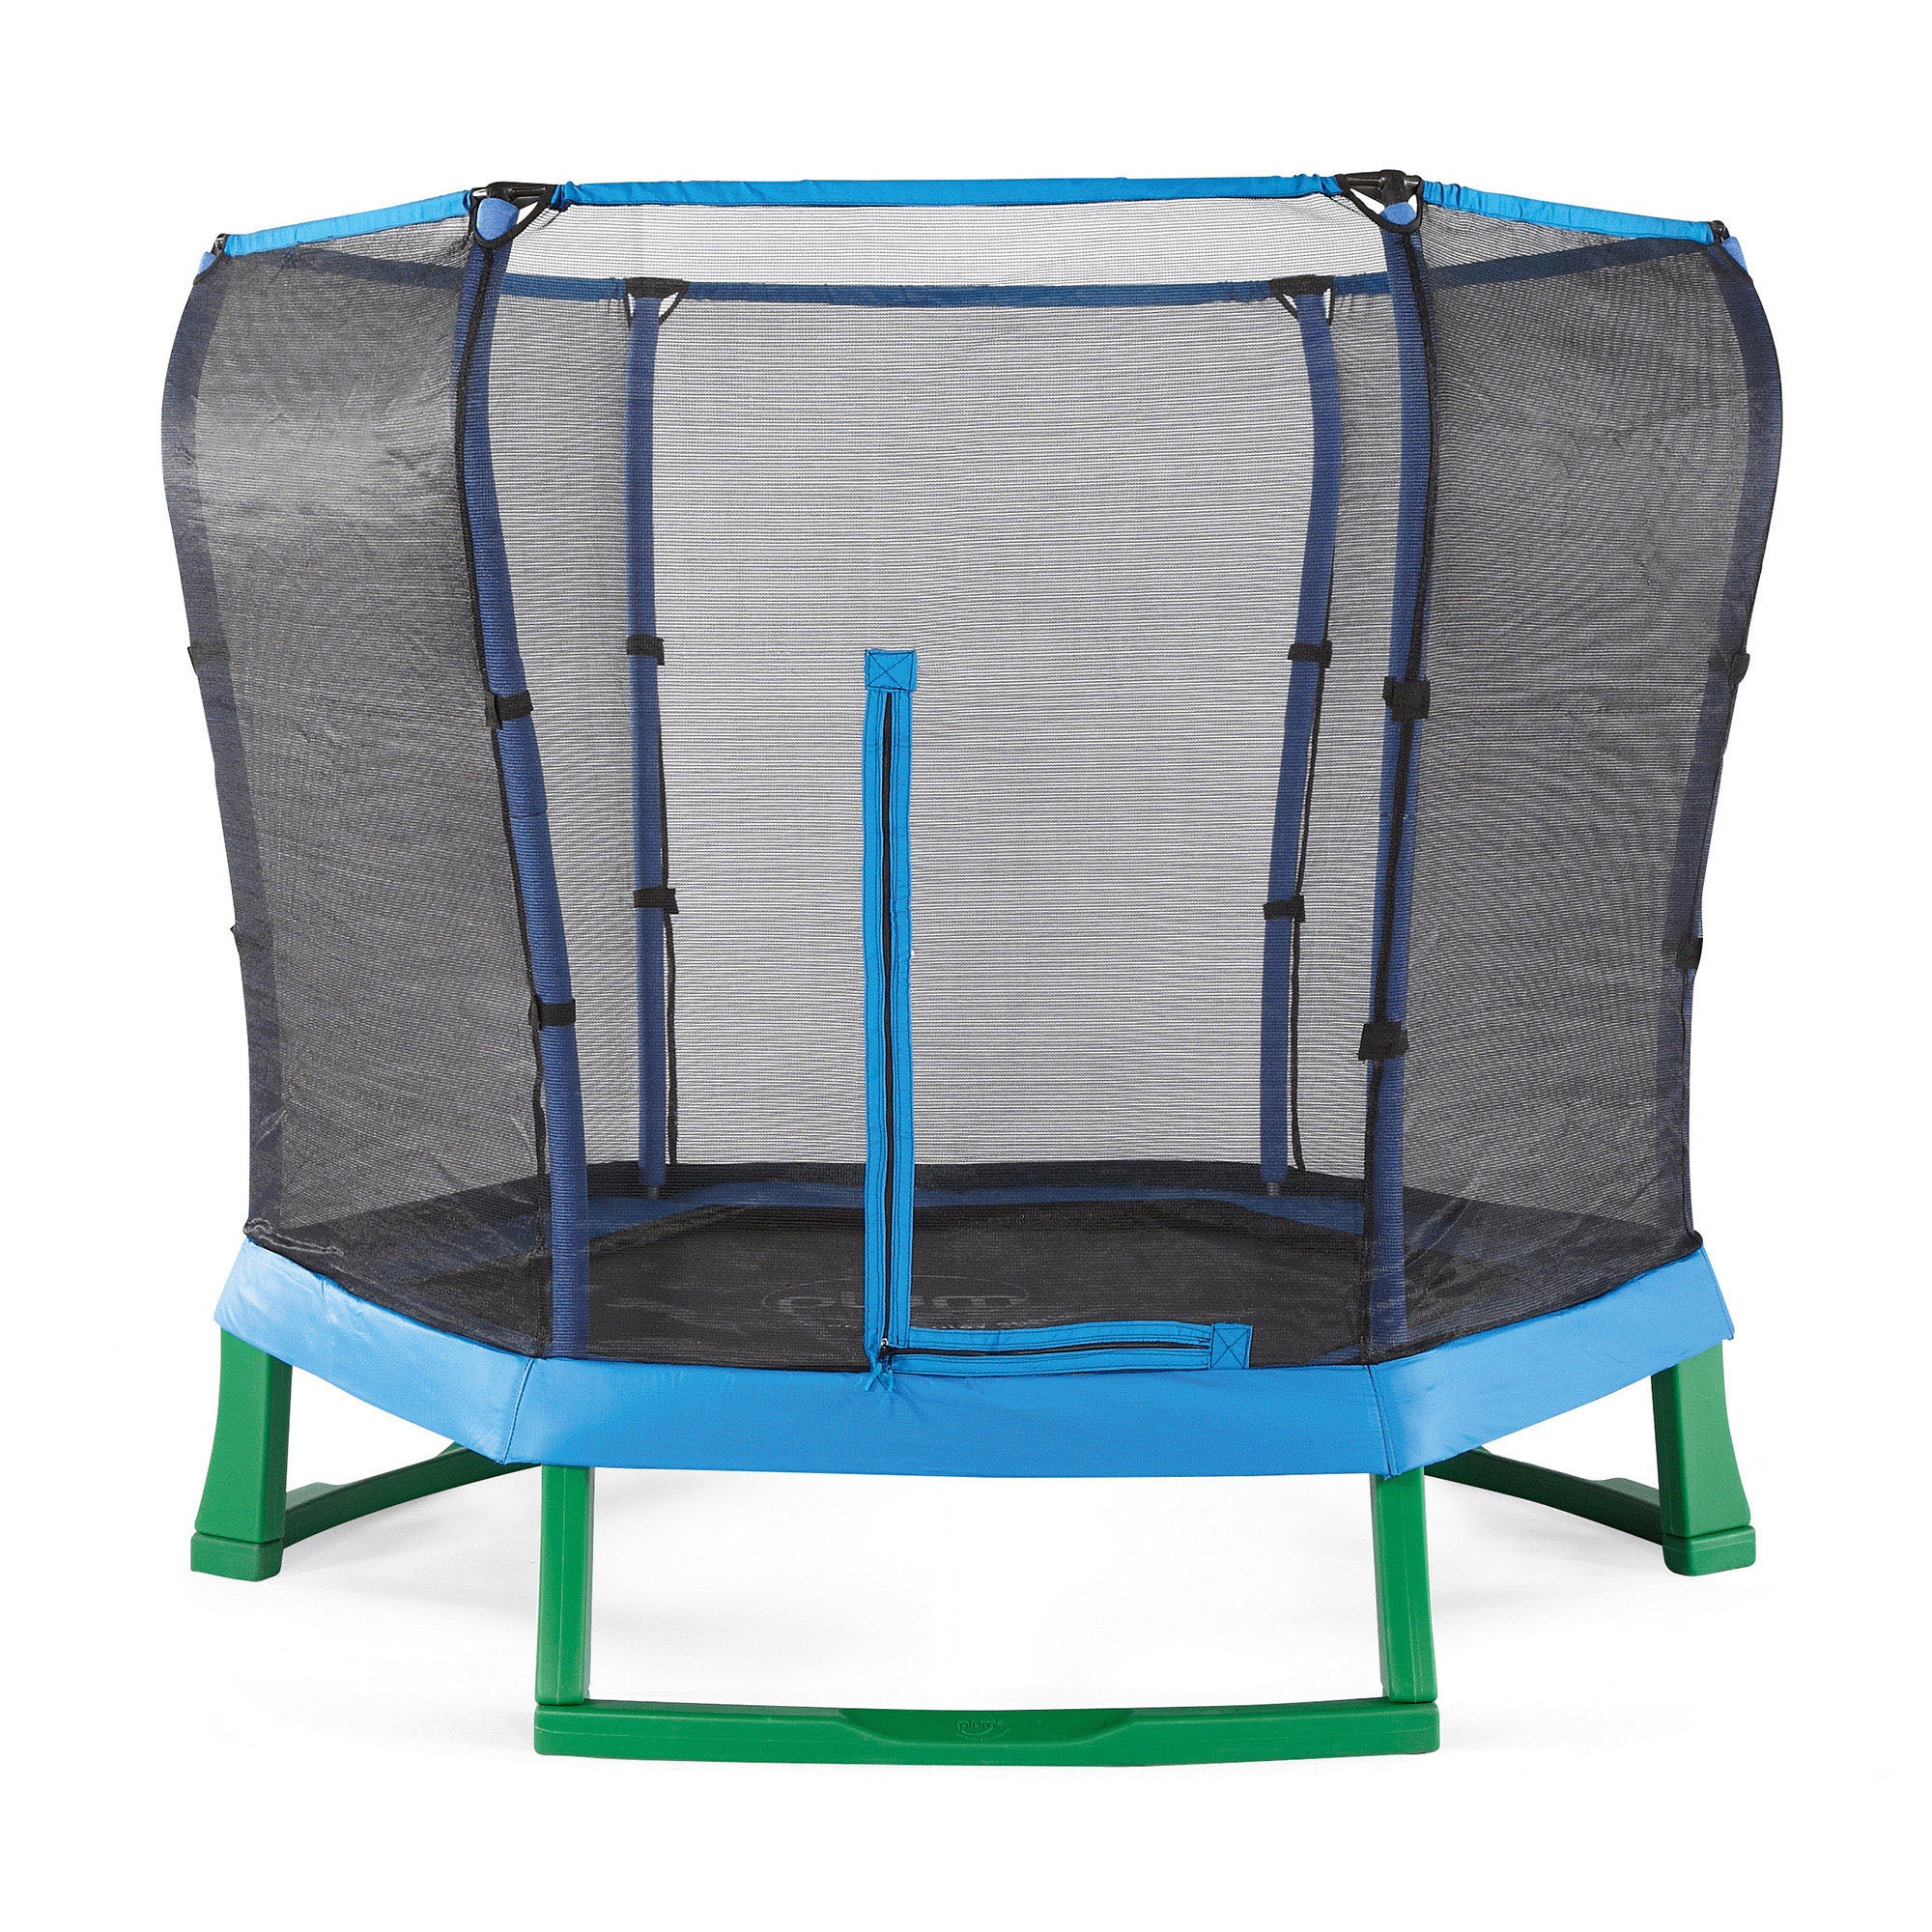 Plum Play 7ft Kids Junior Trampoline with Enclosure Net in Blue